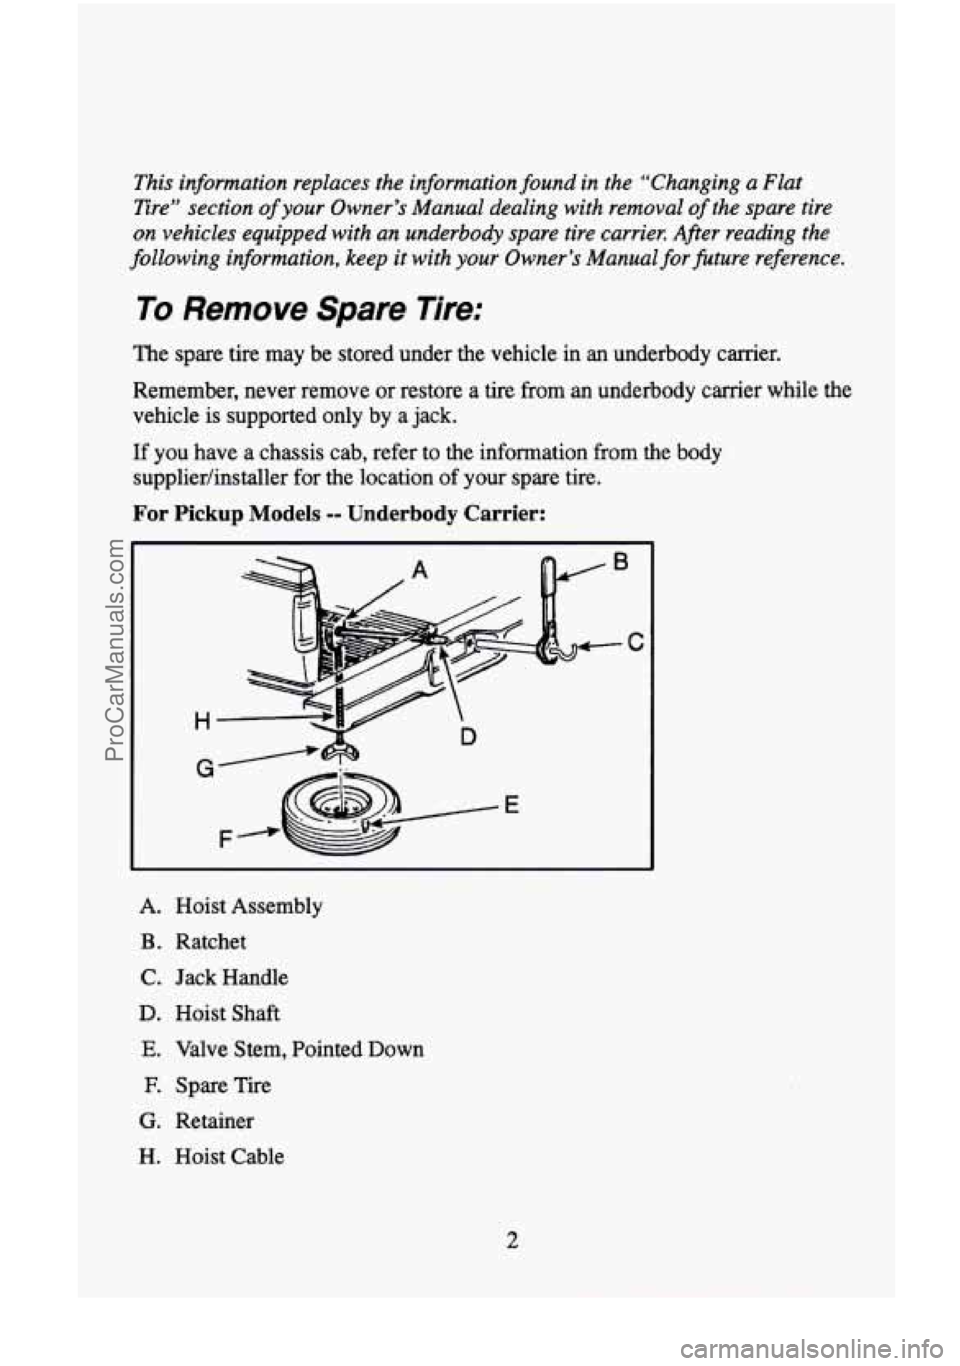 CHEVROLET SUBURBAN 1996  Owners Manual This  information replaces the  information  found in  the  “Changing  a Flat 
Ere”  section 
of your Owner’s  Manual  dealing  with  removal of the  spare  tire 
on vehicles equipped with  an u